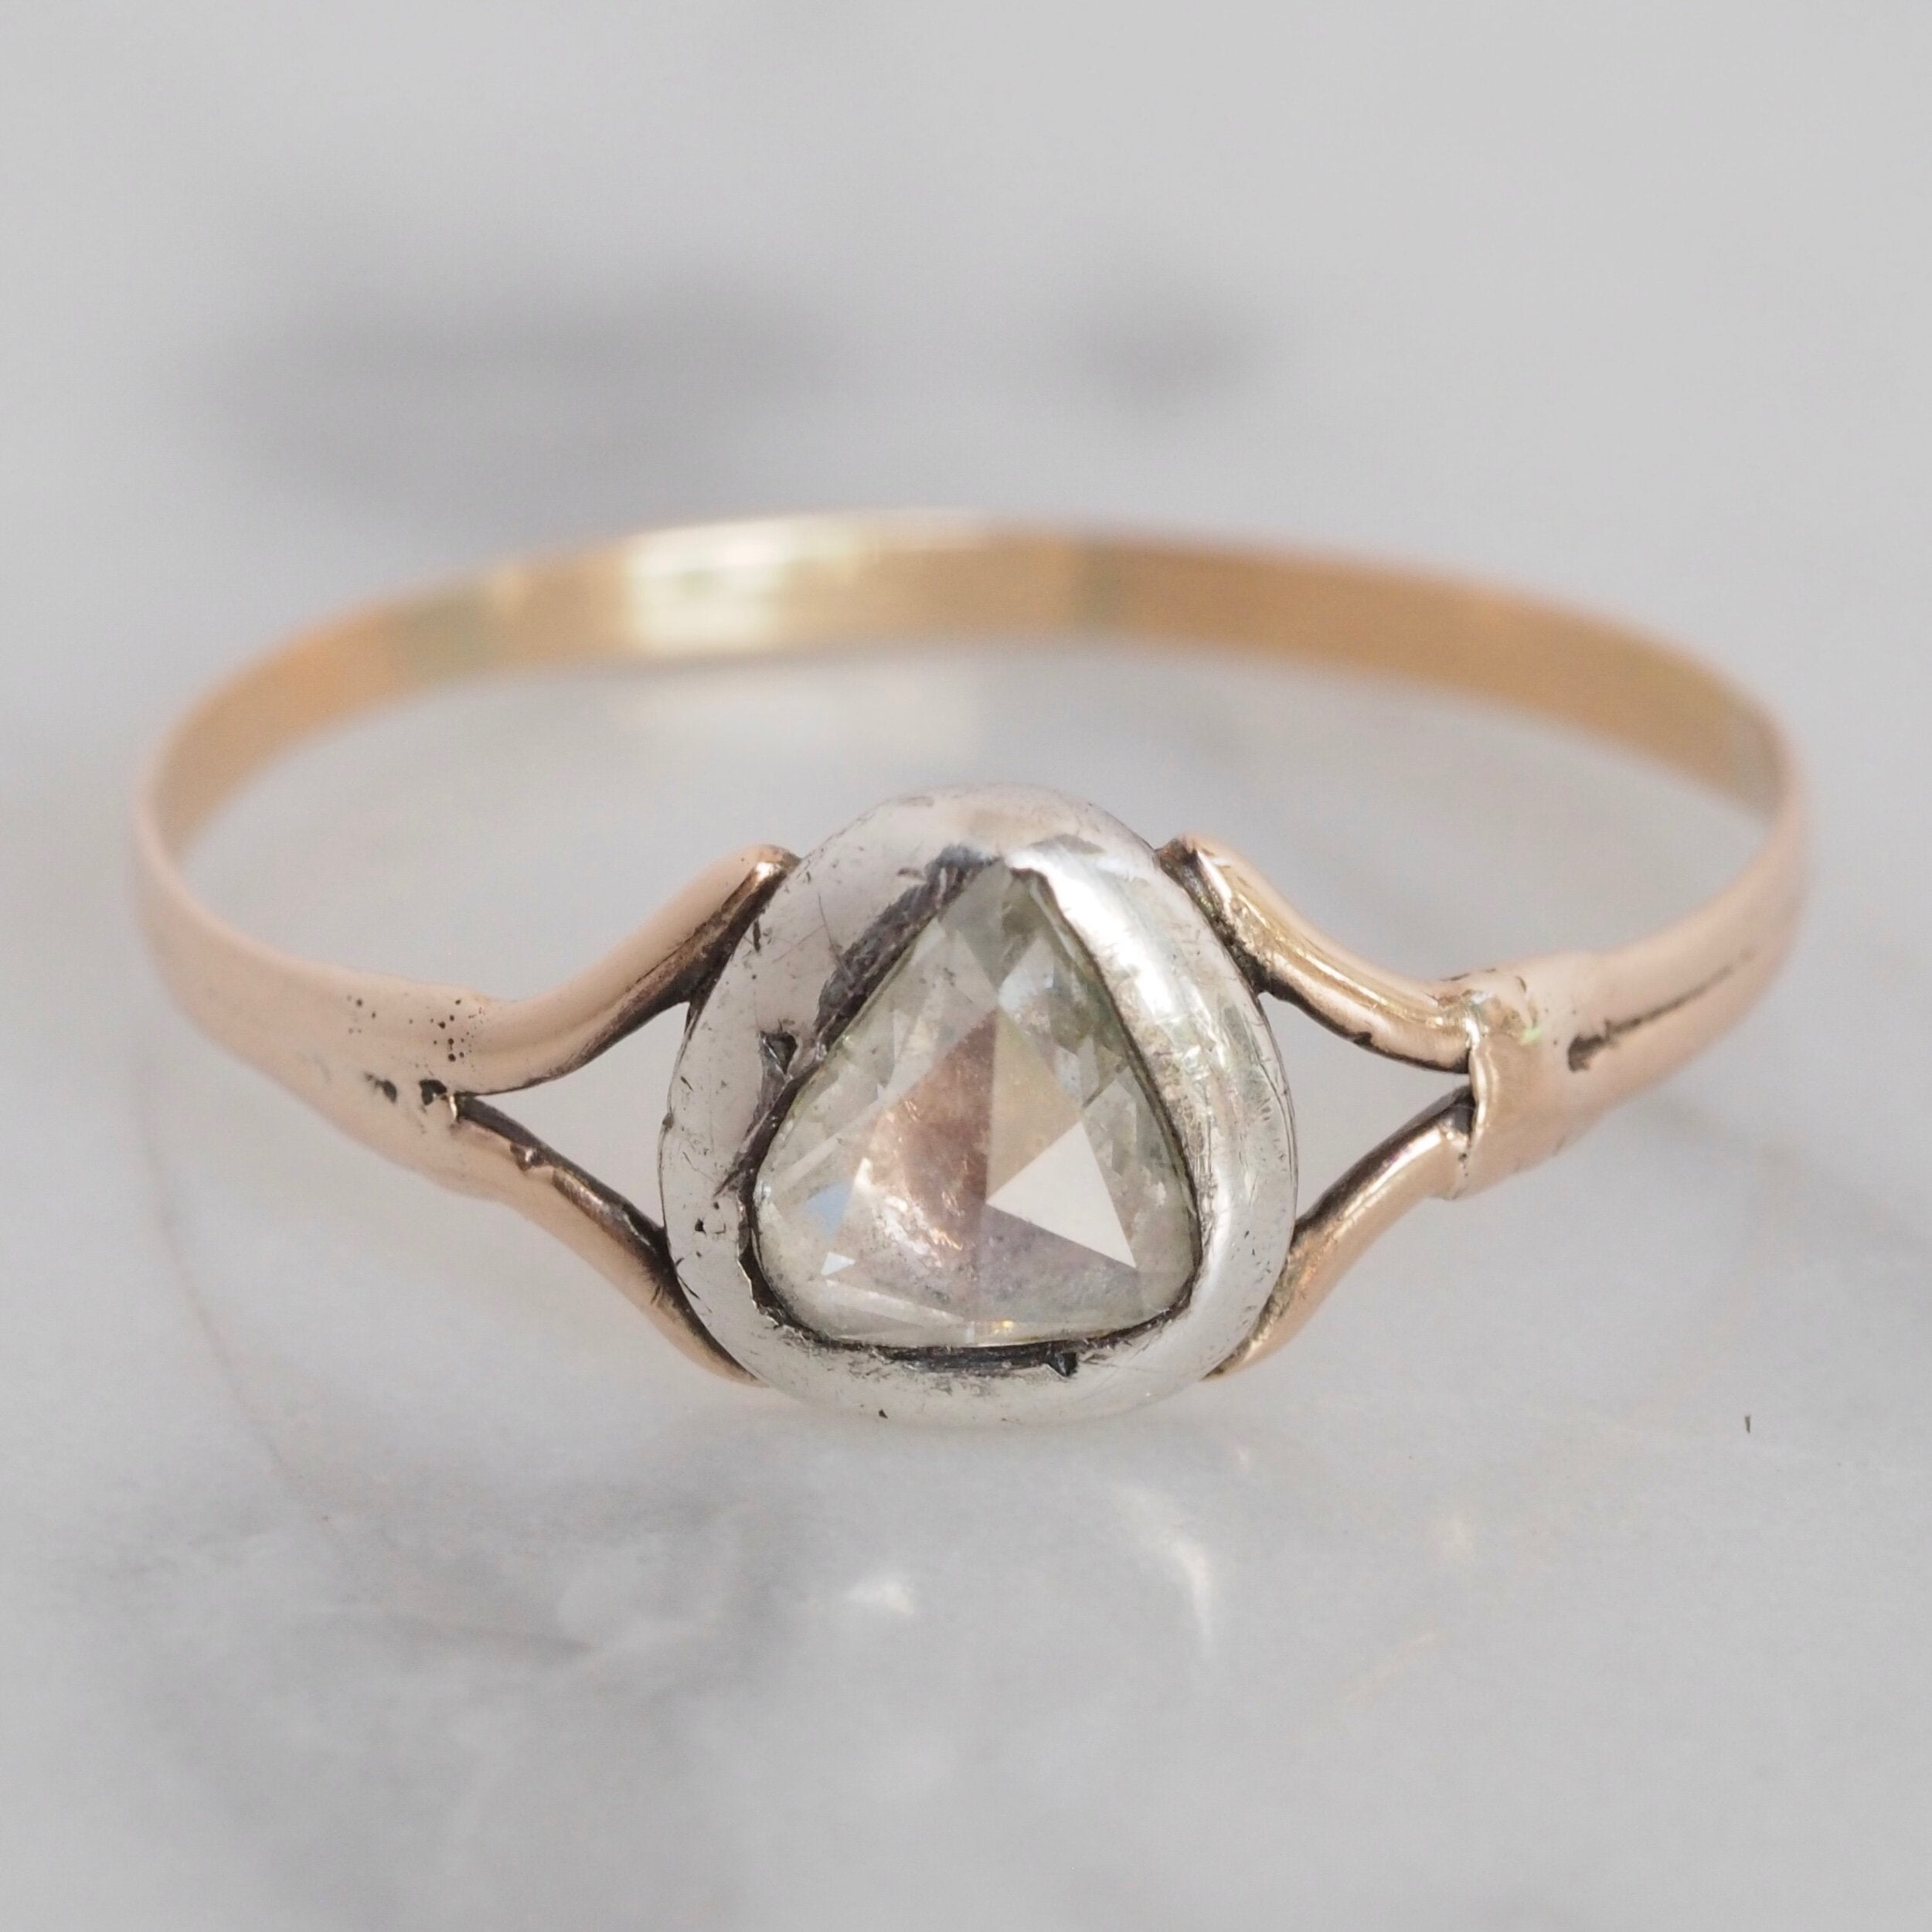 Antique Georgian 14k Gold and Silver Heart Shaped Rose Cut Diamond Ring